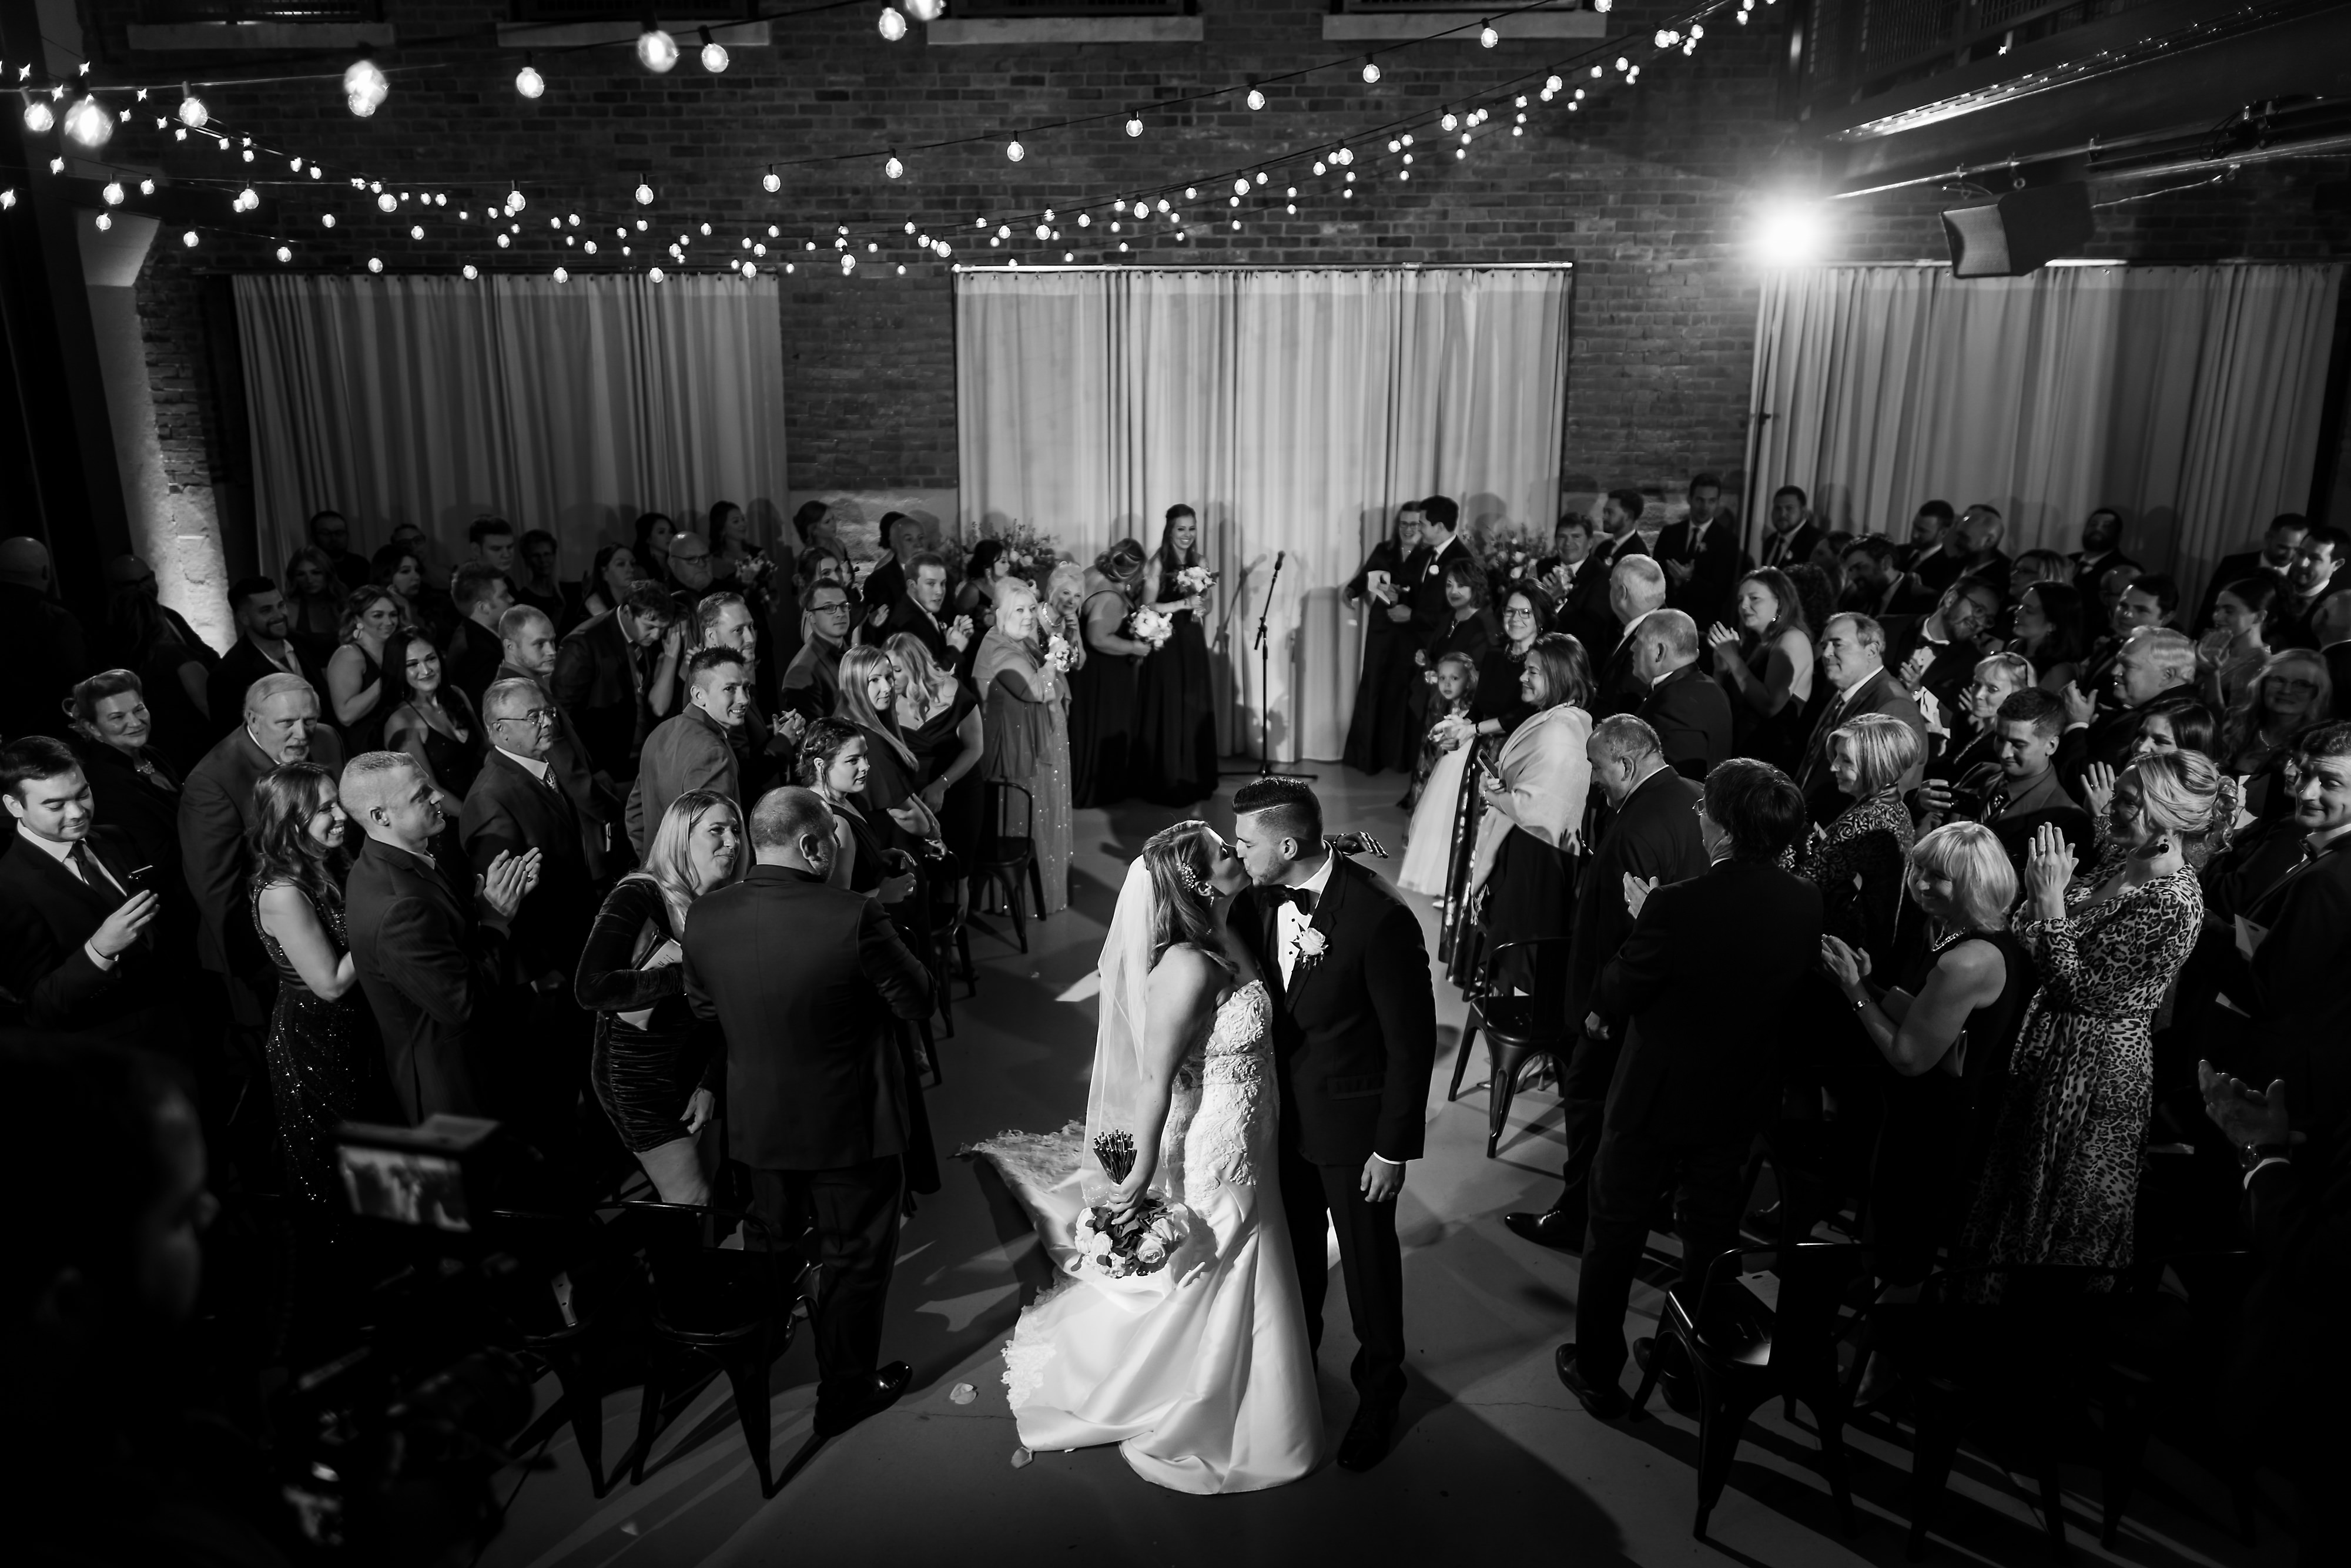 Wide angle view of couple kissing in North Atrium ceremony space with candles and chandeliers during wedding ceremony at Artifact Events in Chicago's Ravenswood neighborhood.